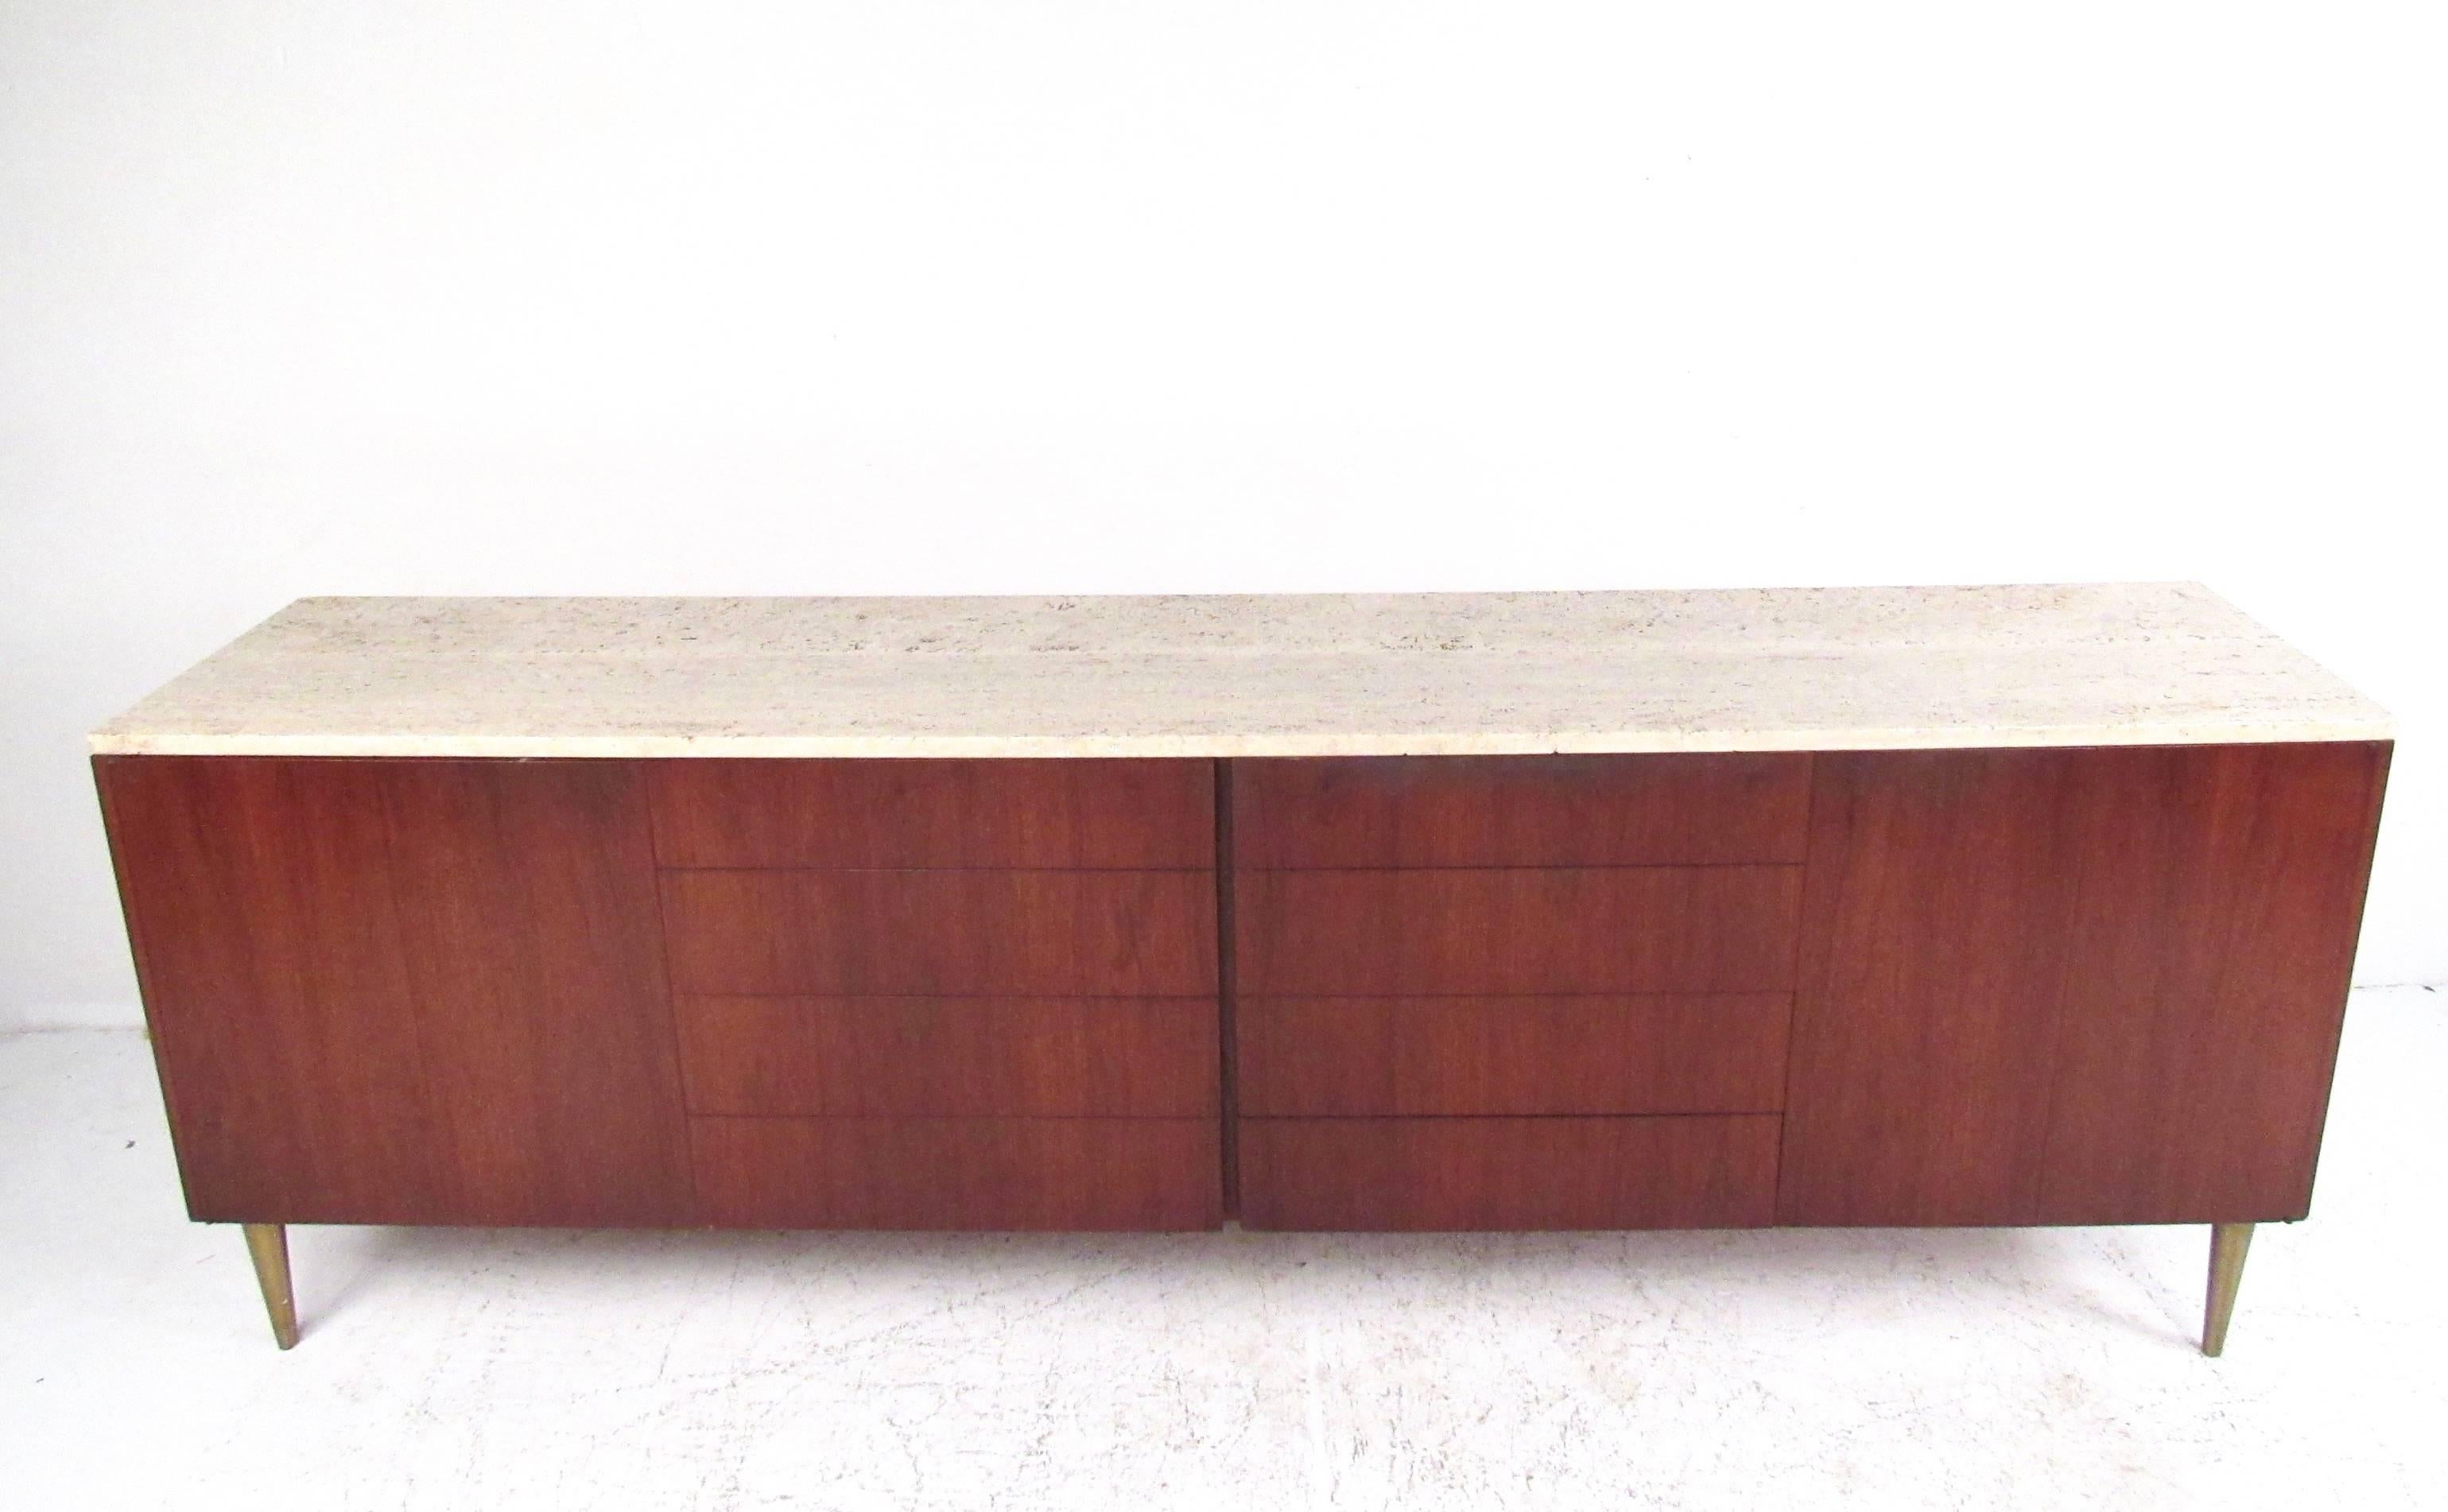 Stylish long midcentury sideboard features bi-fold doors hide mixed shelf and drawer storage. Unique travertine top compliments the rich teak finish of the piece, while tapered brass legs round out the vintage appeal. Please confirm item location